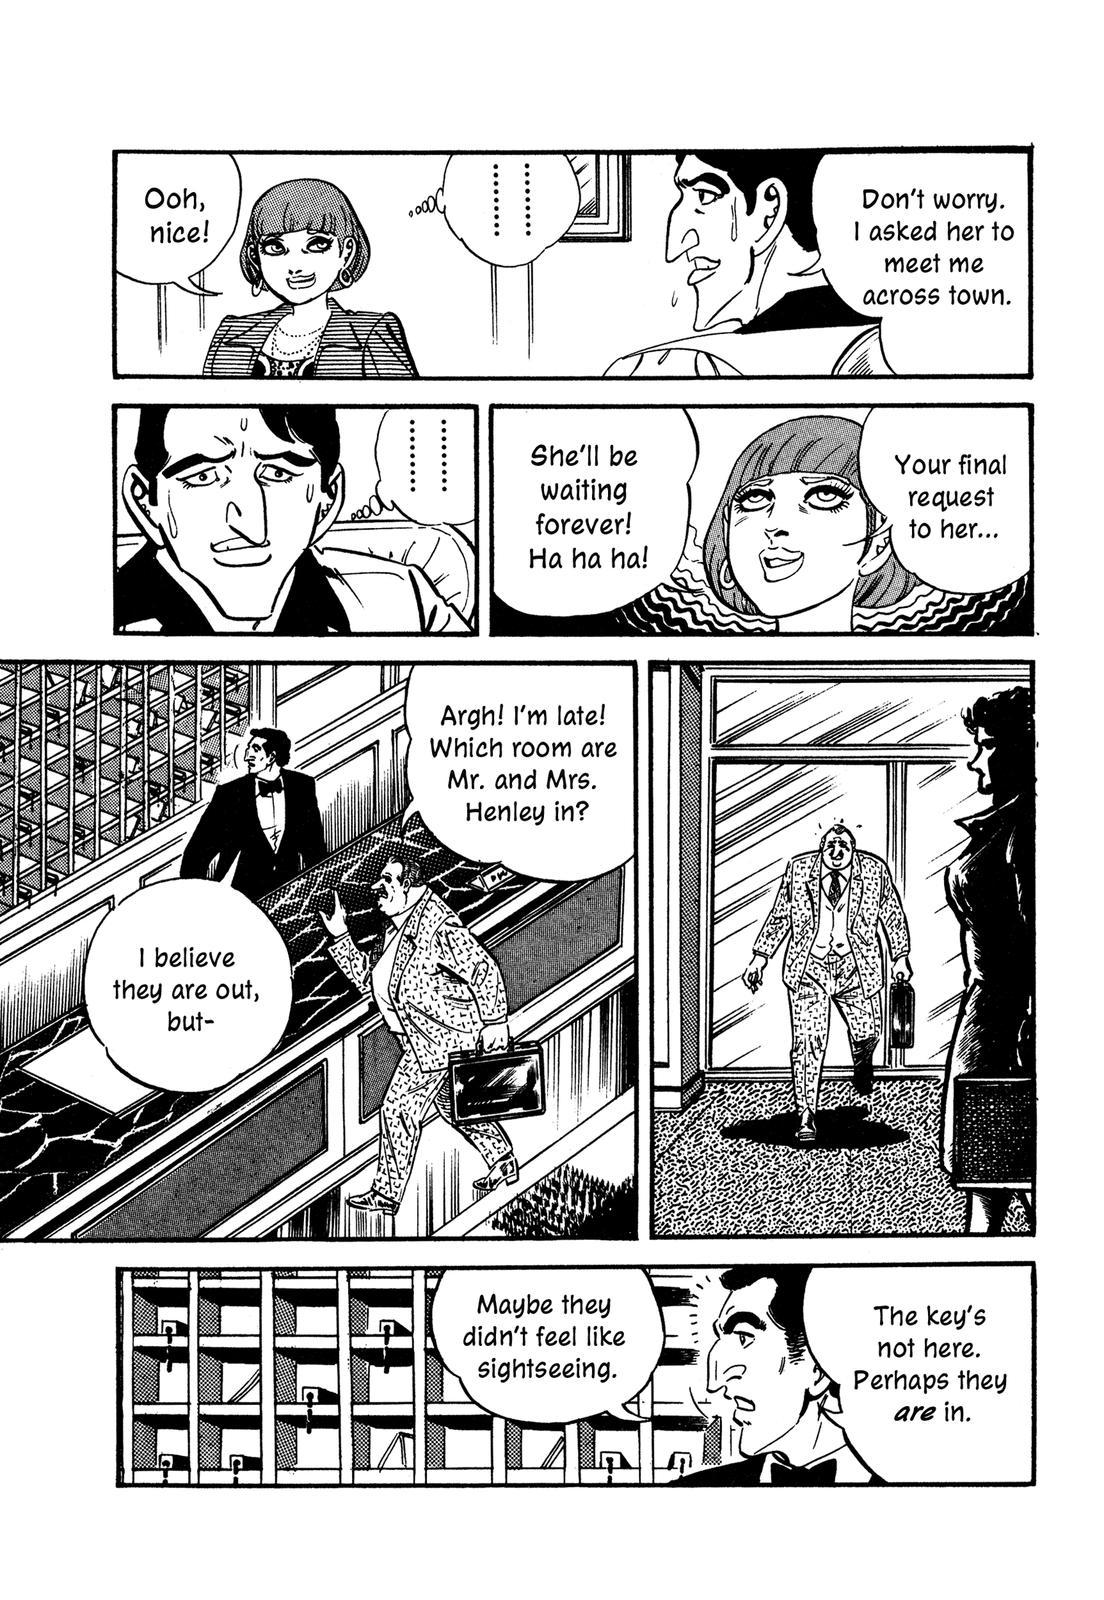 Doll: The Hotel Detective Vol. 2 Ch. 8 Rome in the Twilight